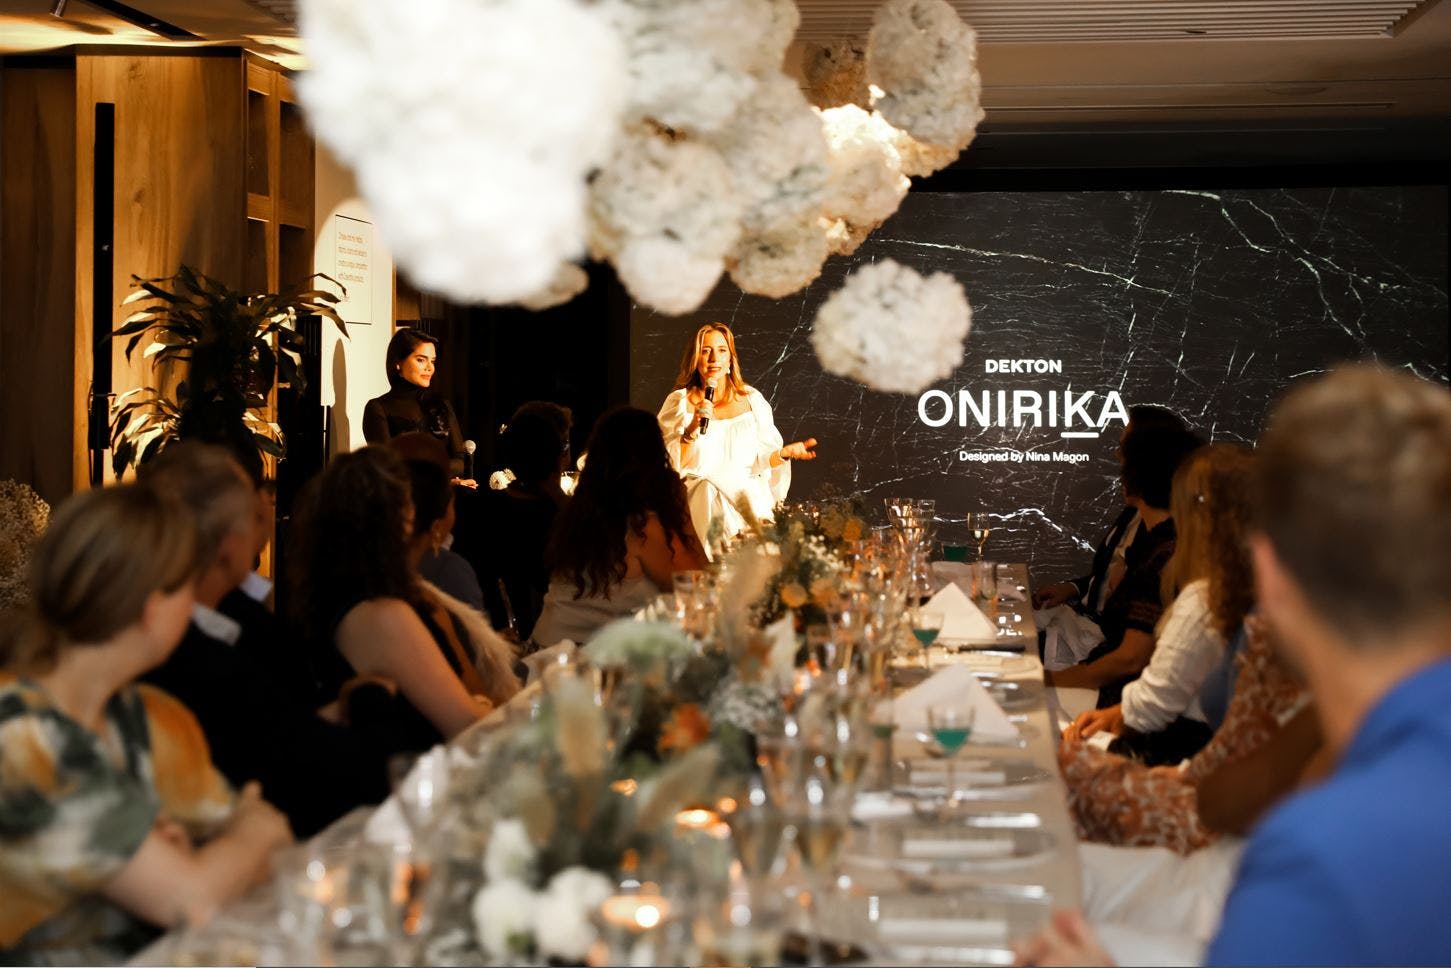 Celebrating the launch of Dekton Onirika with an exclusive event in NYC